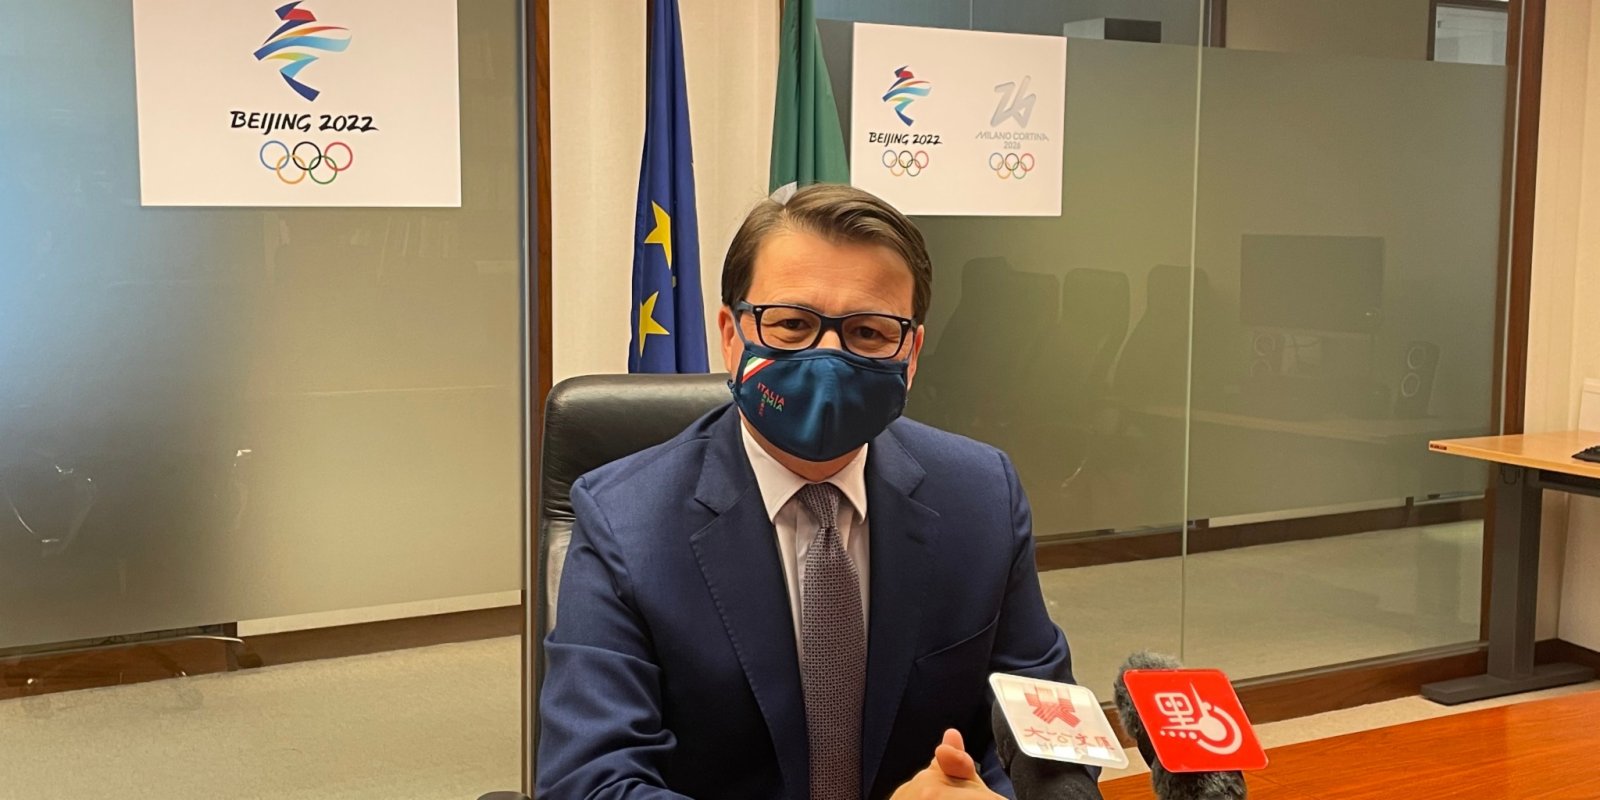 Beijing Winter Olympics | Italian Consul General highlights Olympic spirit & resilience of humanity against pandemic